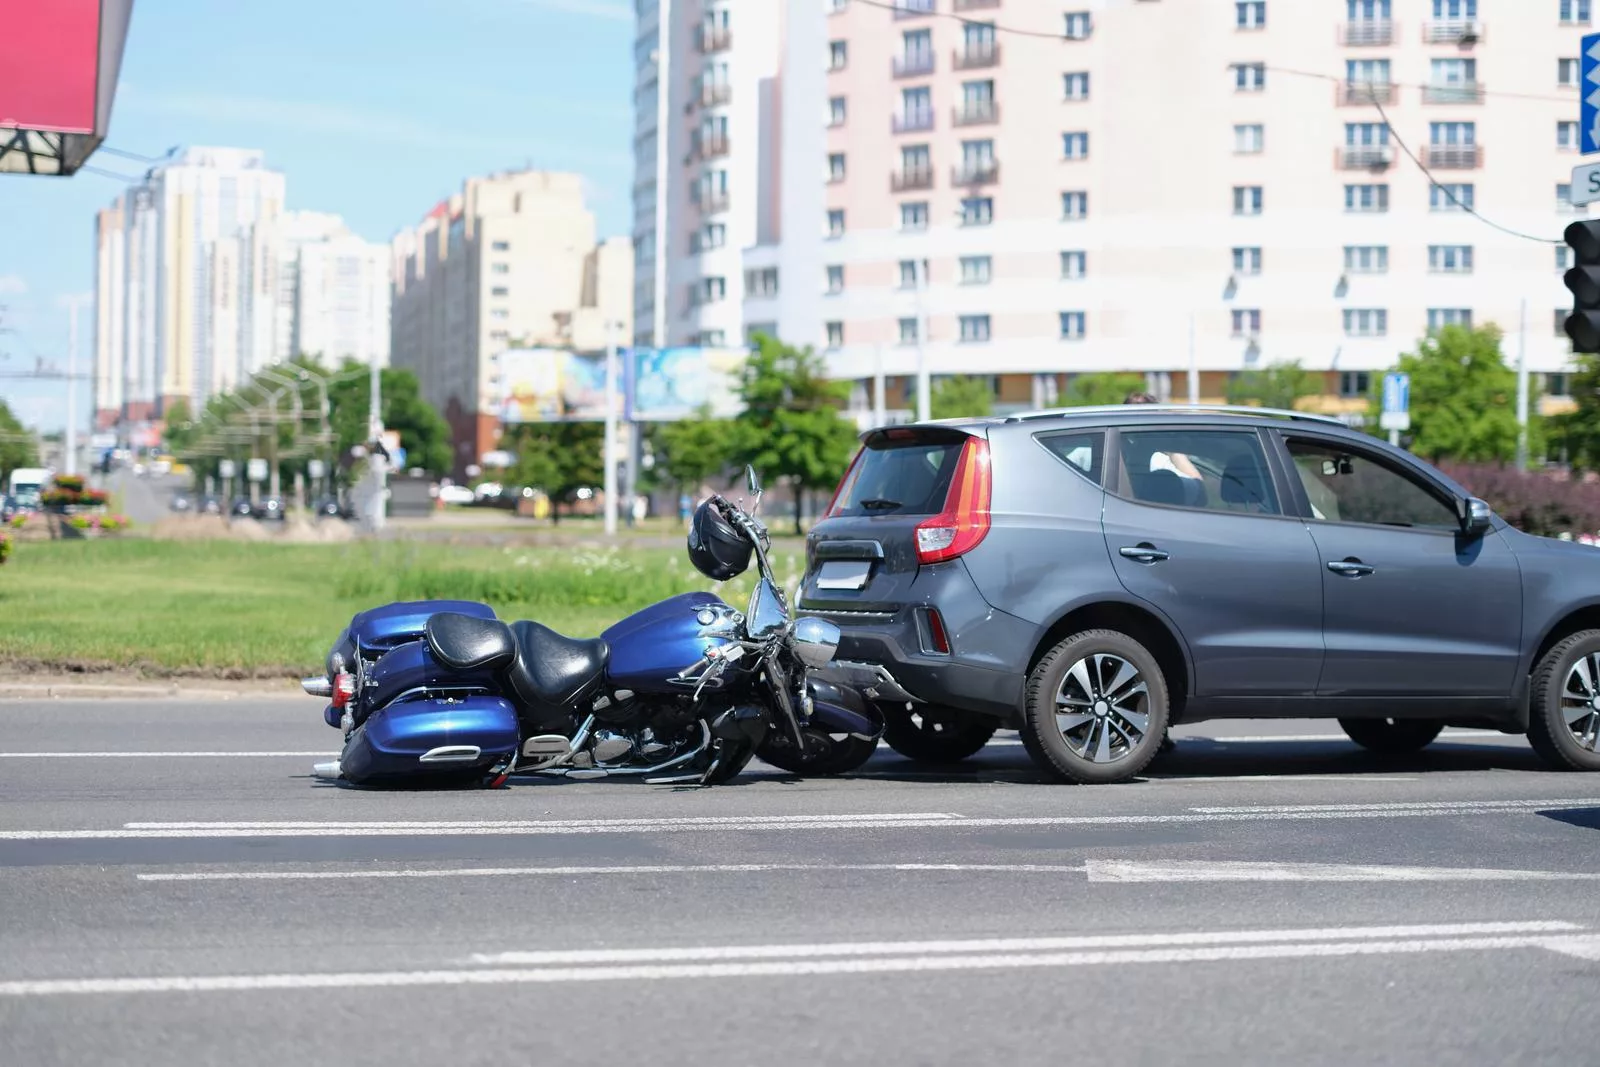 Orlando Motorcycle Accident Law Firm